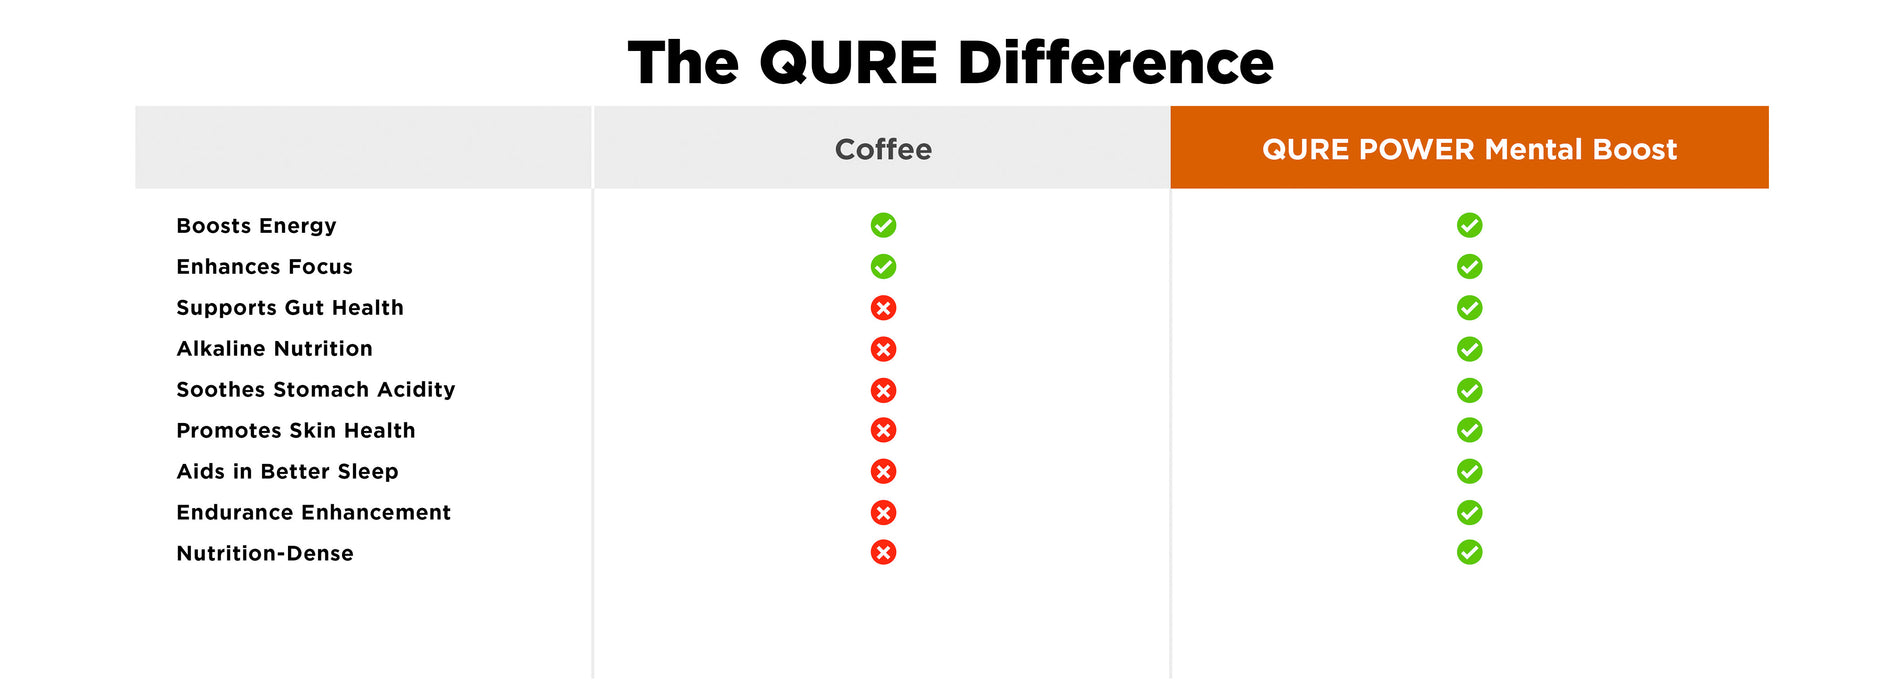 qure diffrence mental boost 